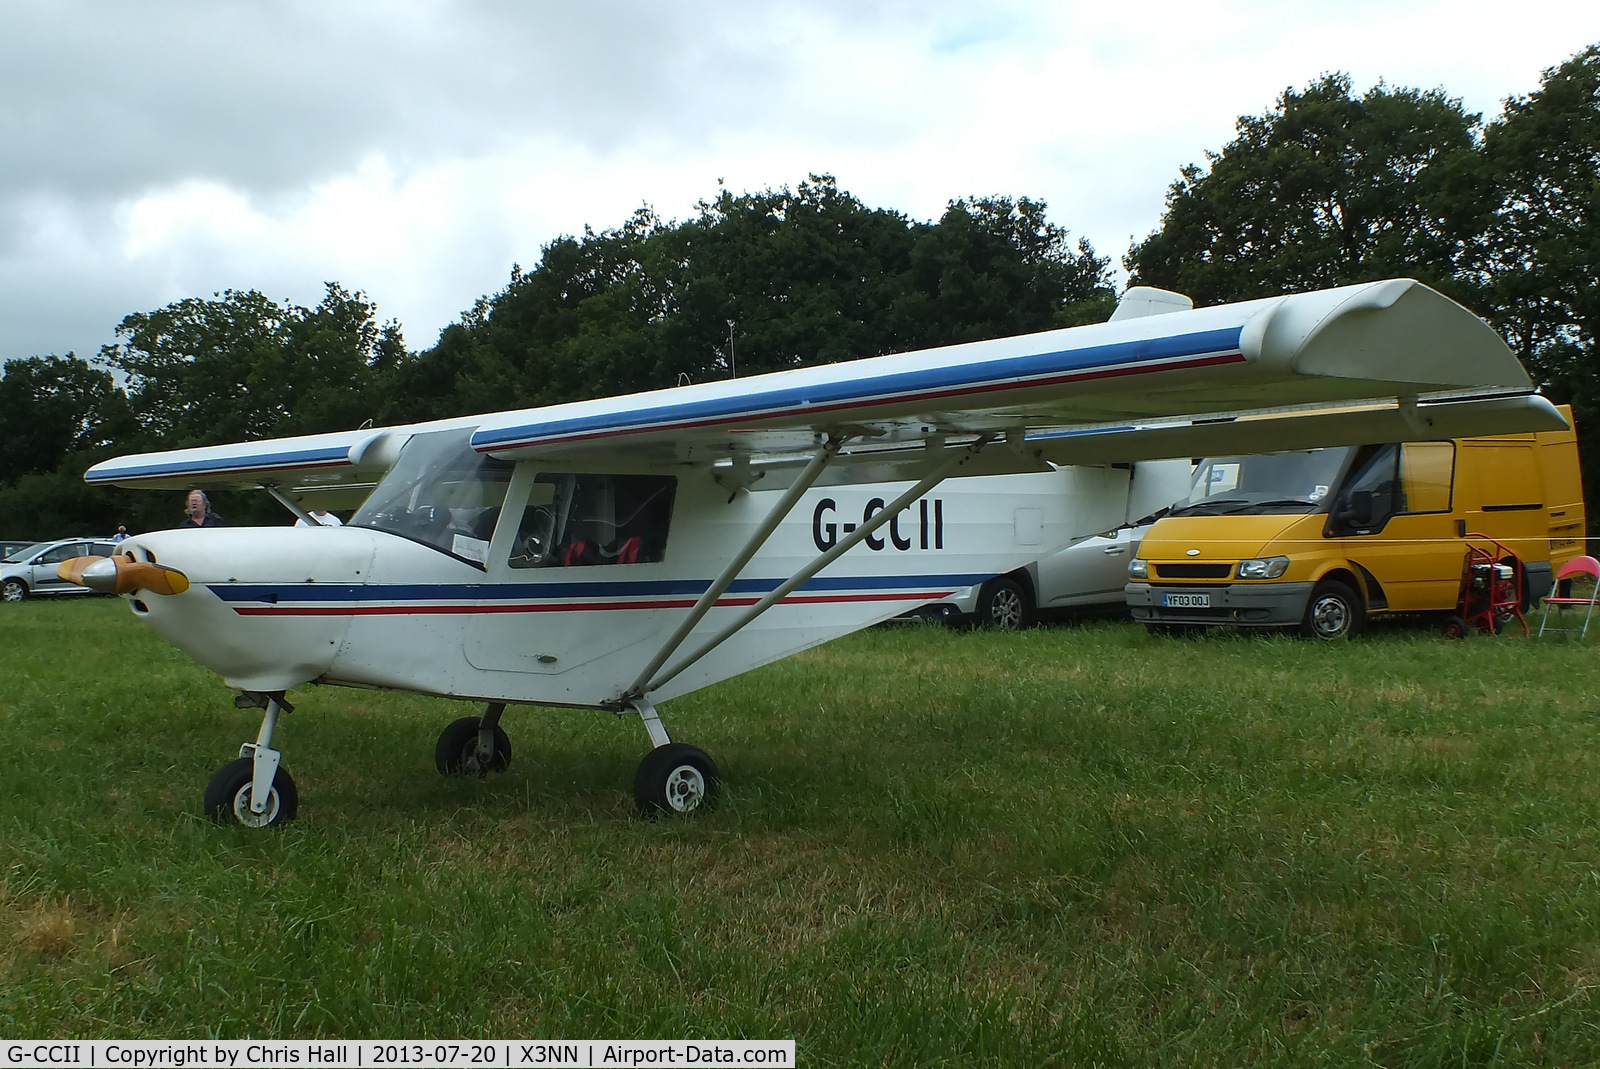 G-CCII, 2003 ICP MXP-740 Savannah J.2(4) C/N BMAA/HB/285, at the Stoke Golding stakeout 2013